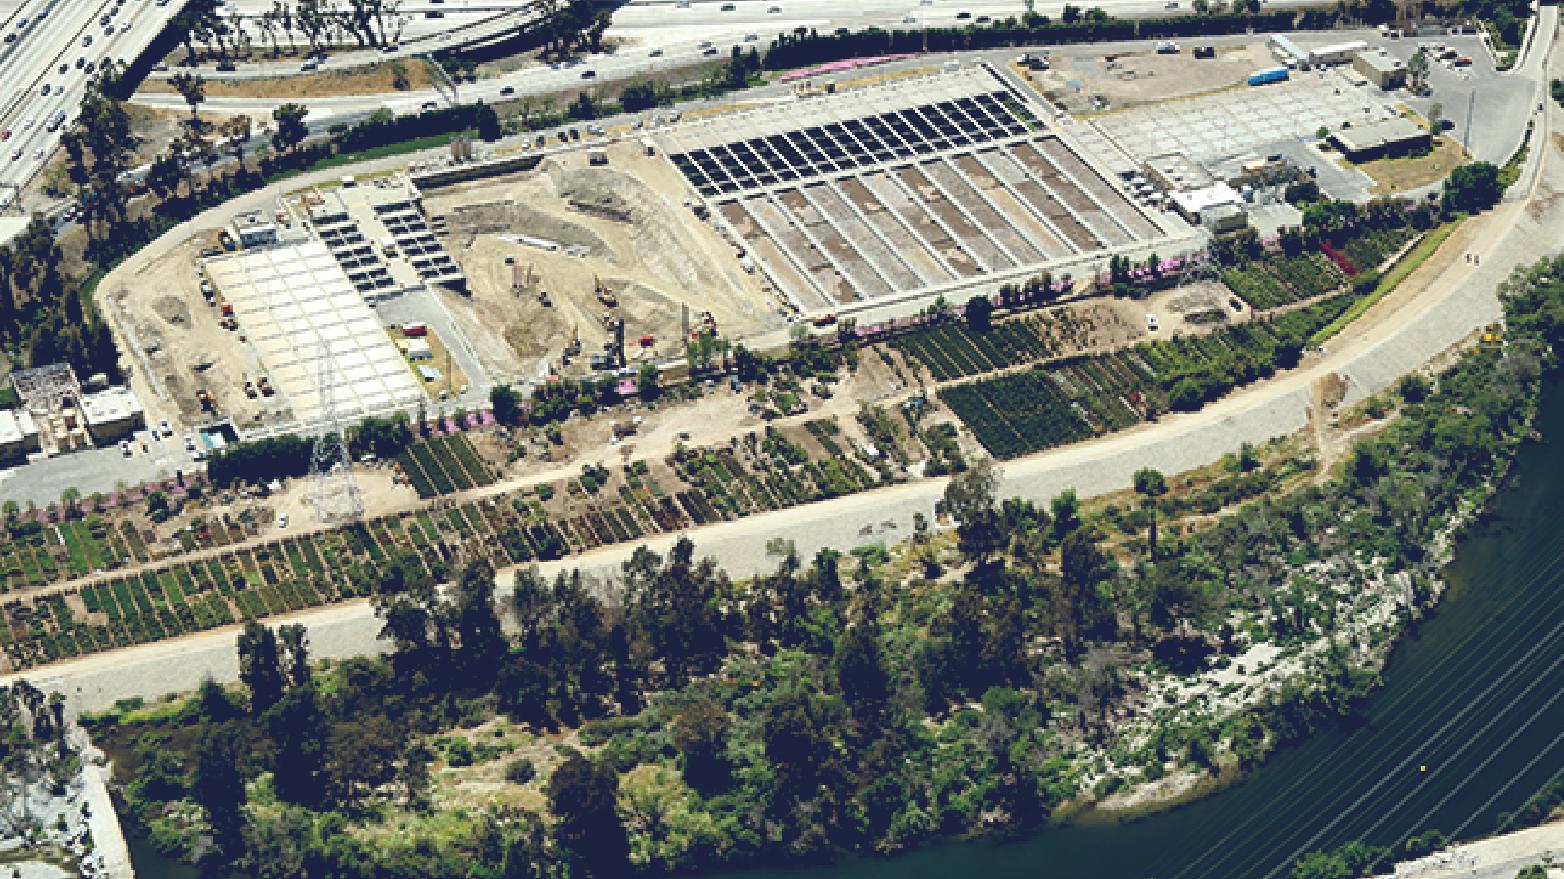 The Los Angeles County Sanitation Districts’ Whittier Narrows Water Reclamation